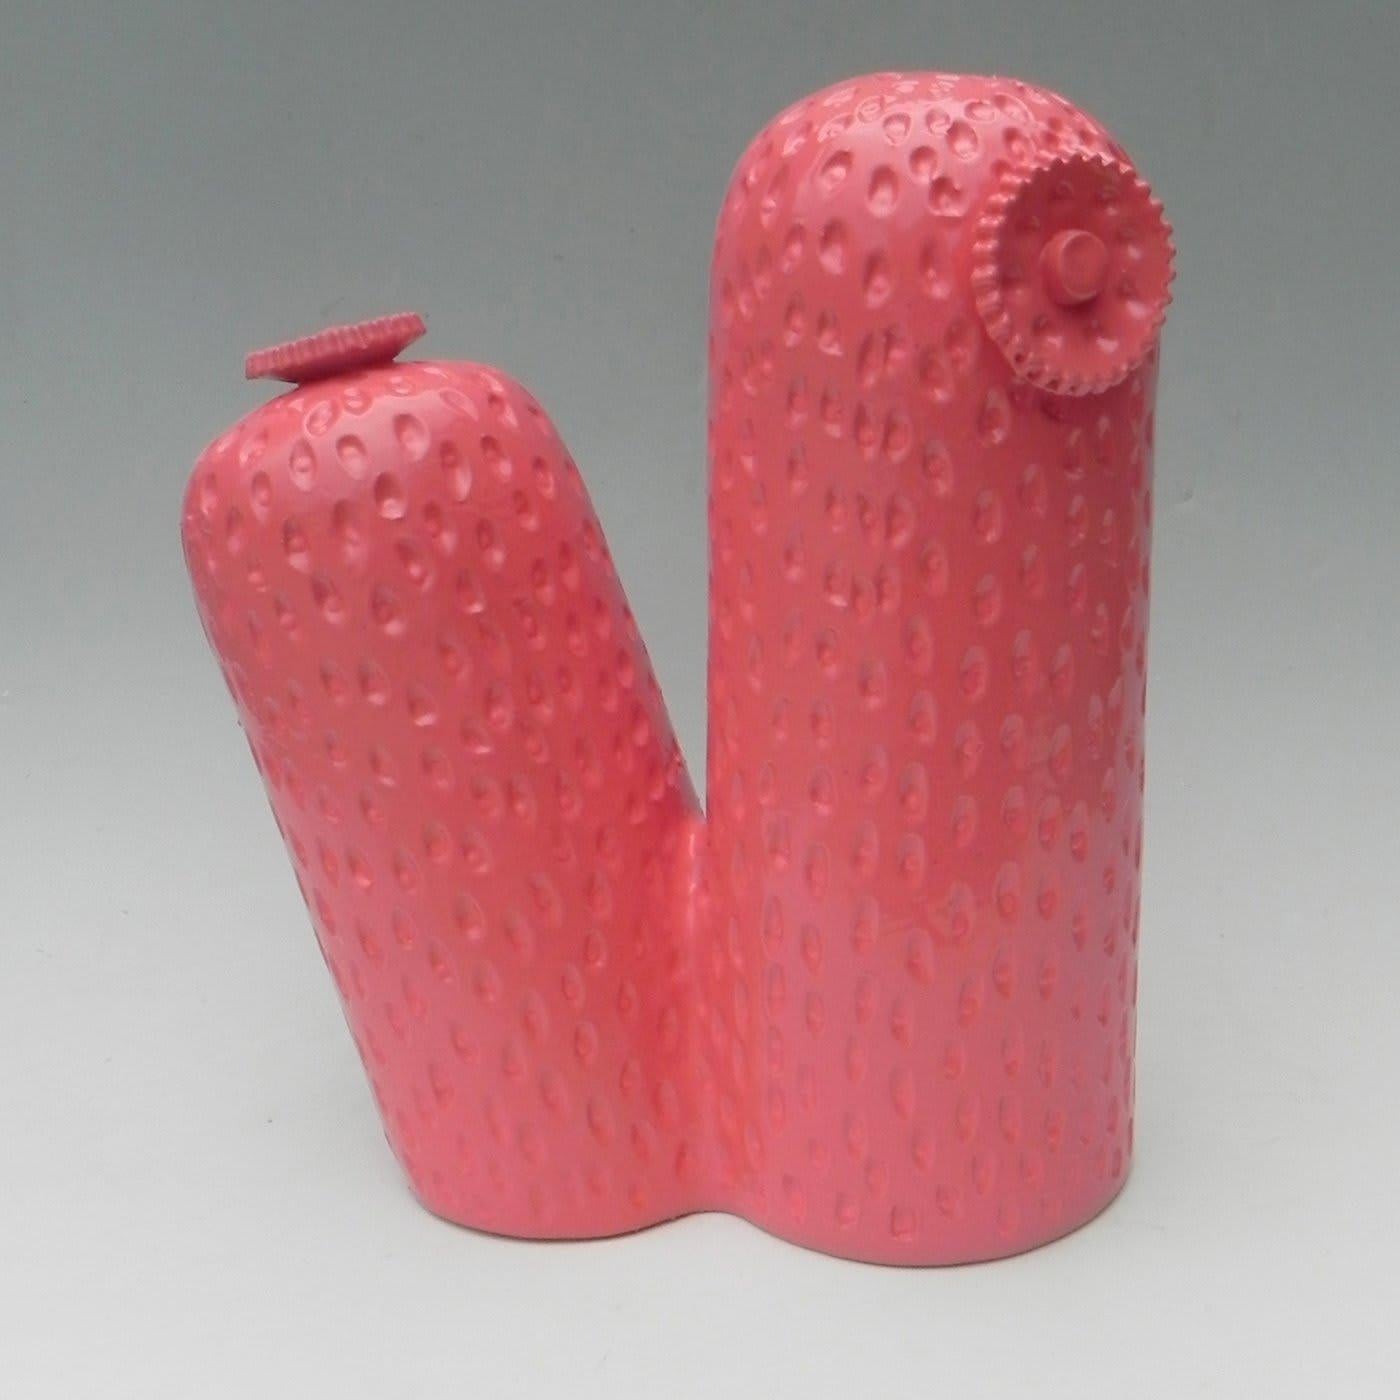 This stylish decorative piece of two crowns of cactus, each with a flower on the side, will bring a whimsical touch into any interior with its striking, hot pink color and life-like finish. Designed by Tullio Manzotti, this ceramic sculpture is part